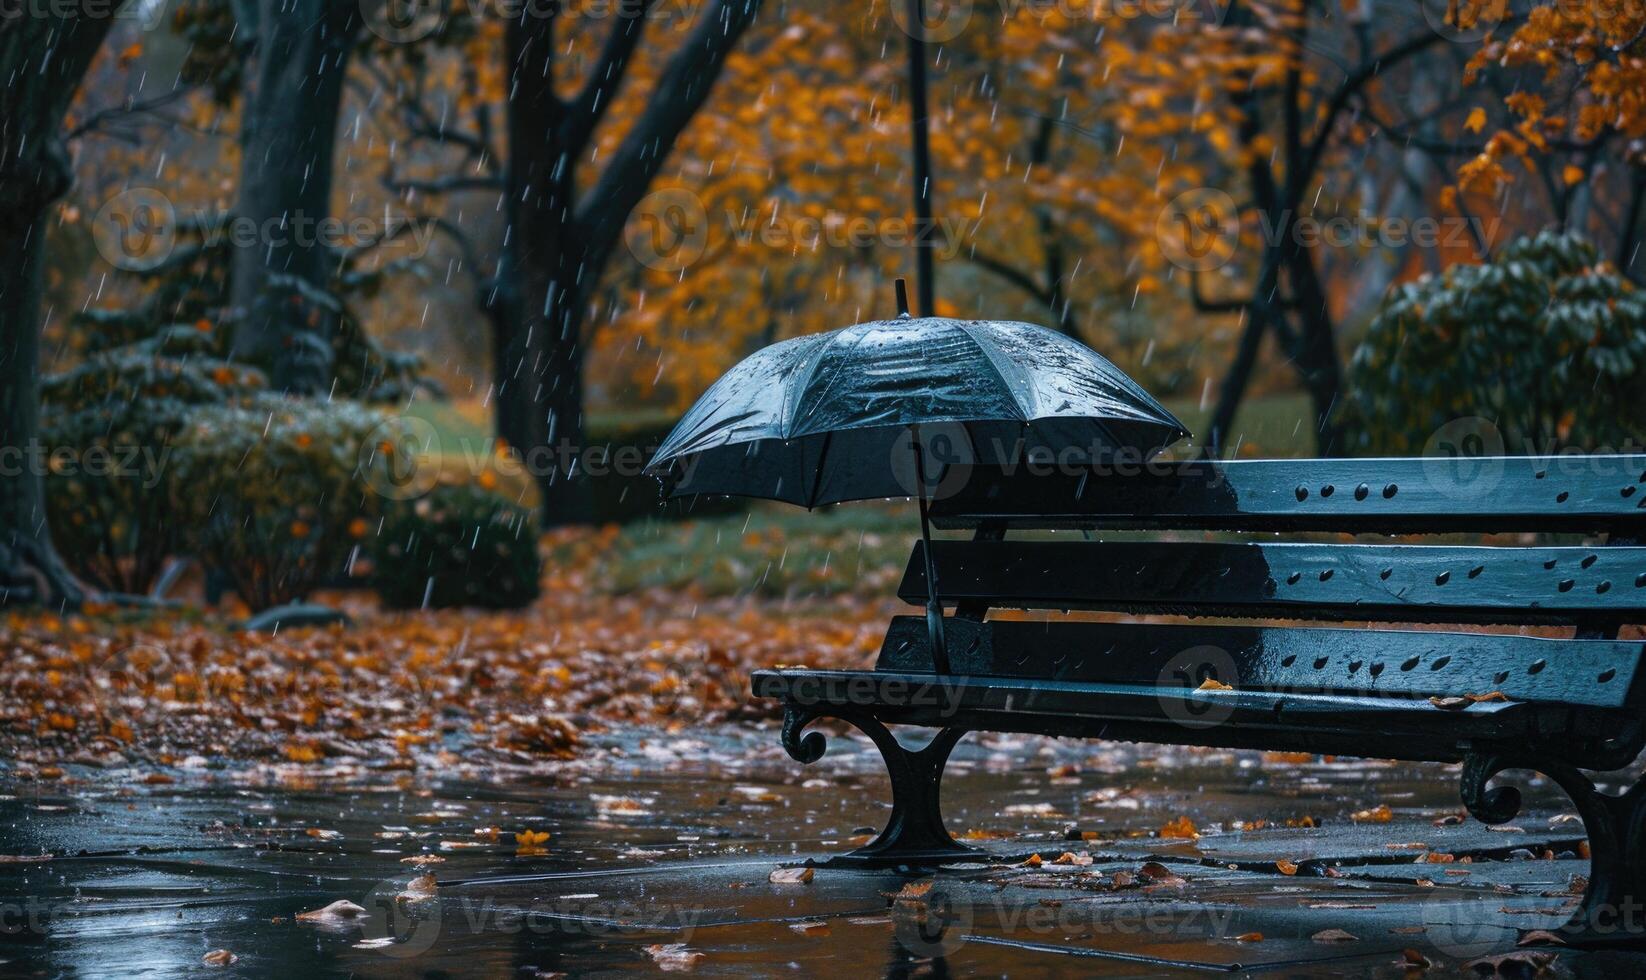 A lone umbrella on a wet park bench during in the rain photo